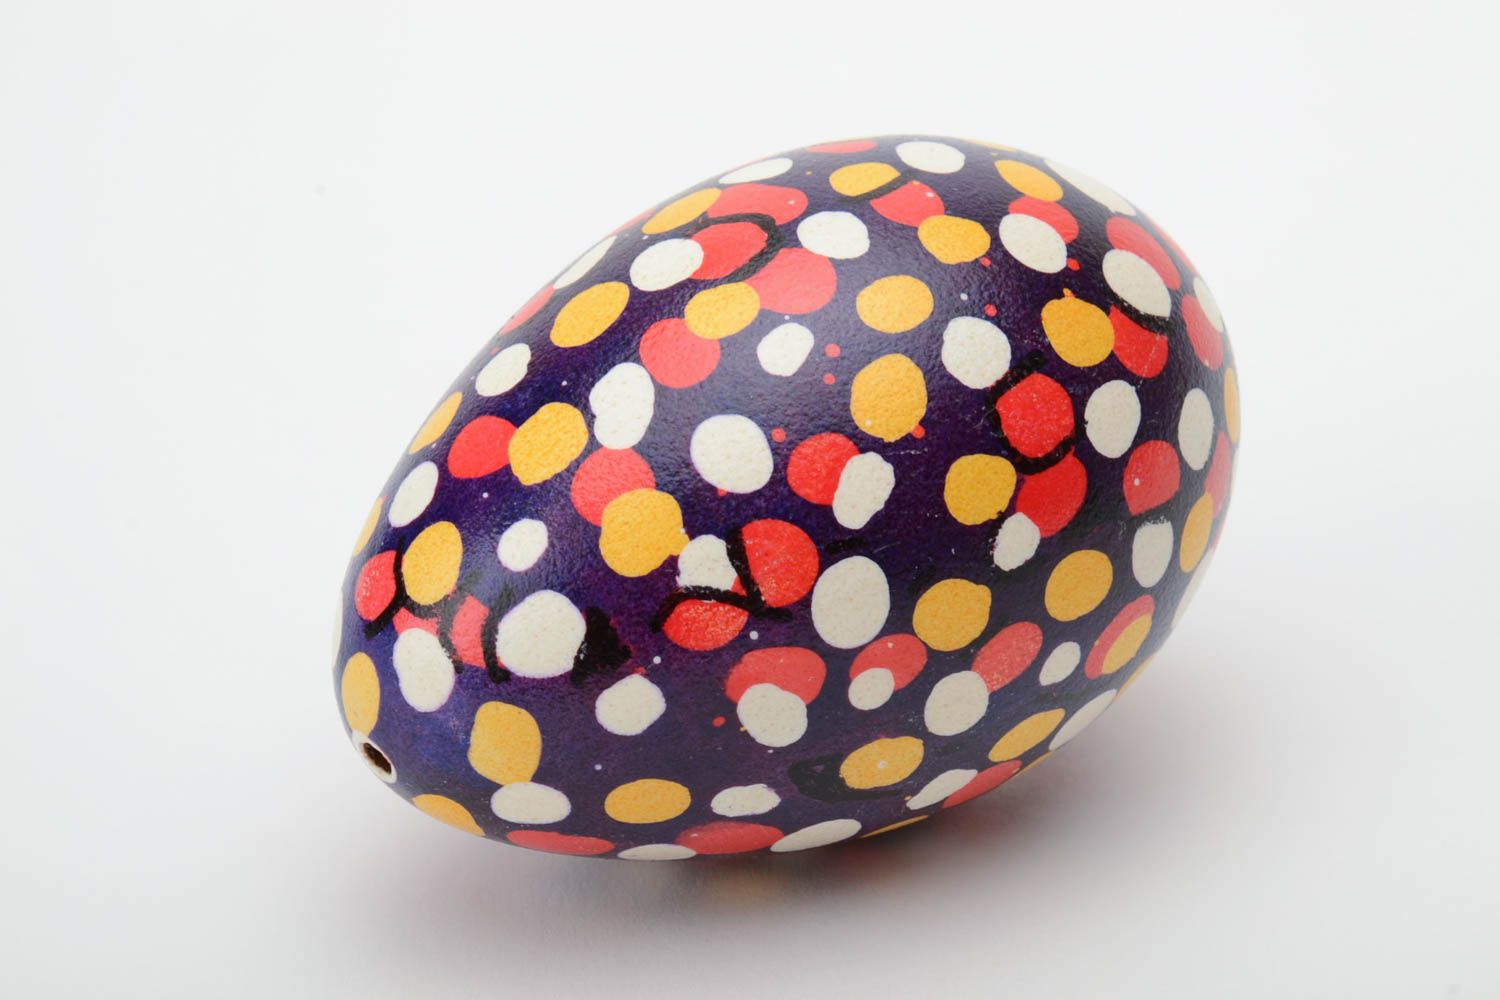 Handmade unusual Easter egg with colorful polka dot pattern on dark background photo 2